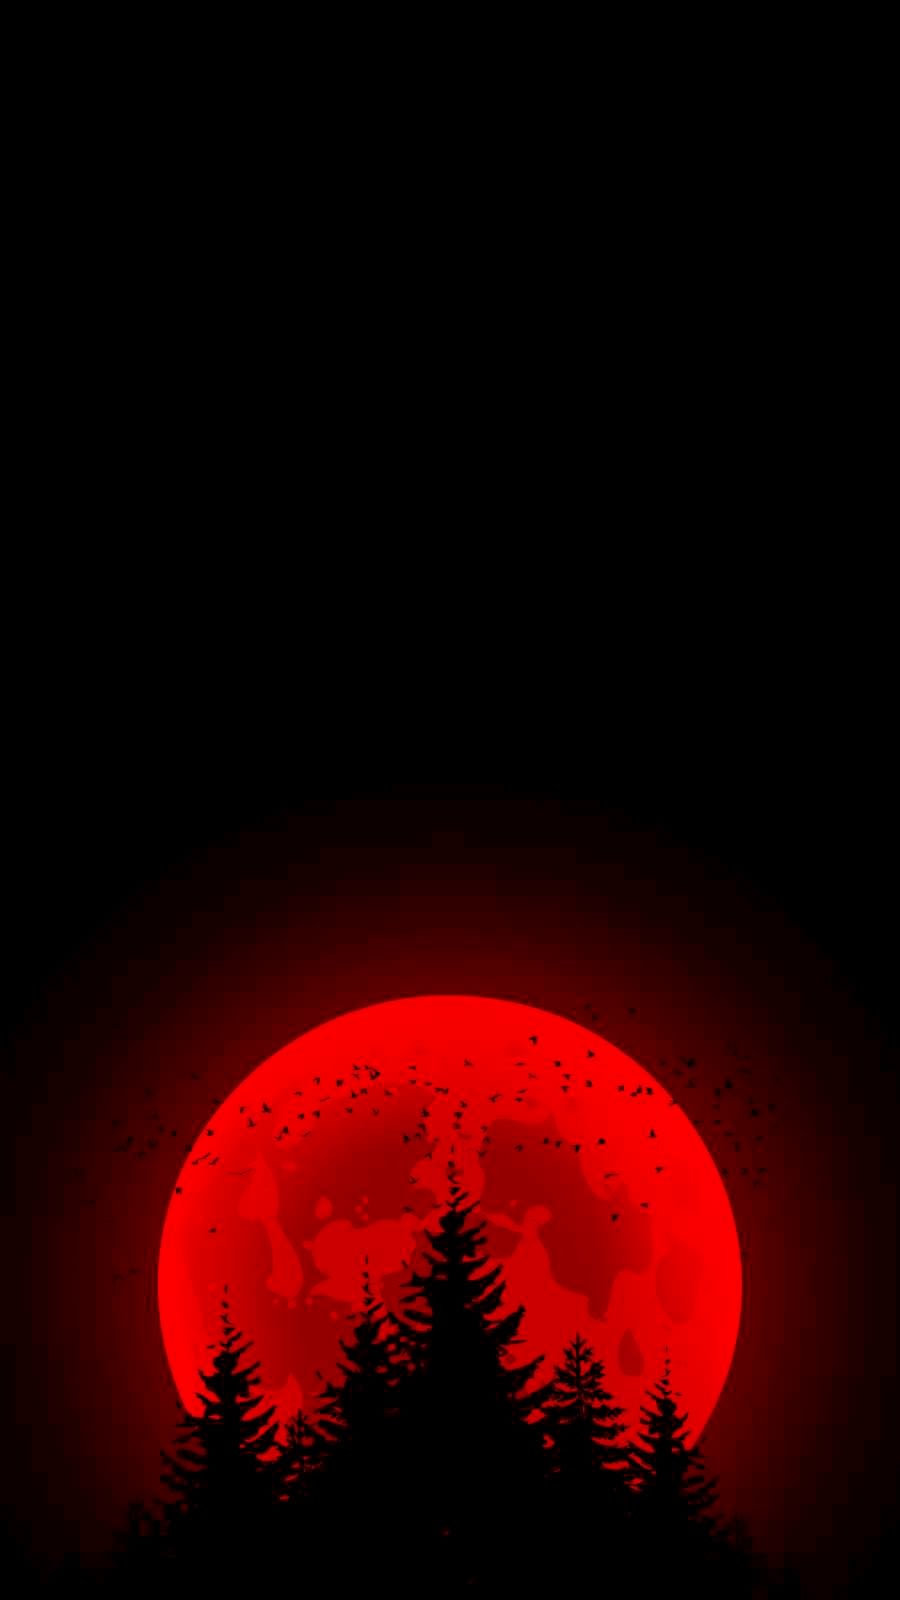 Red moon in the night - IPhone red